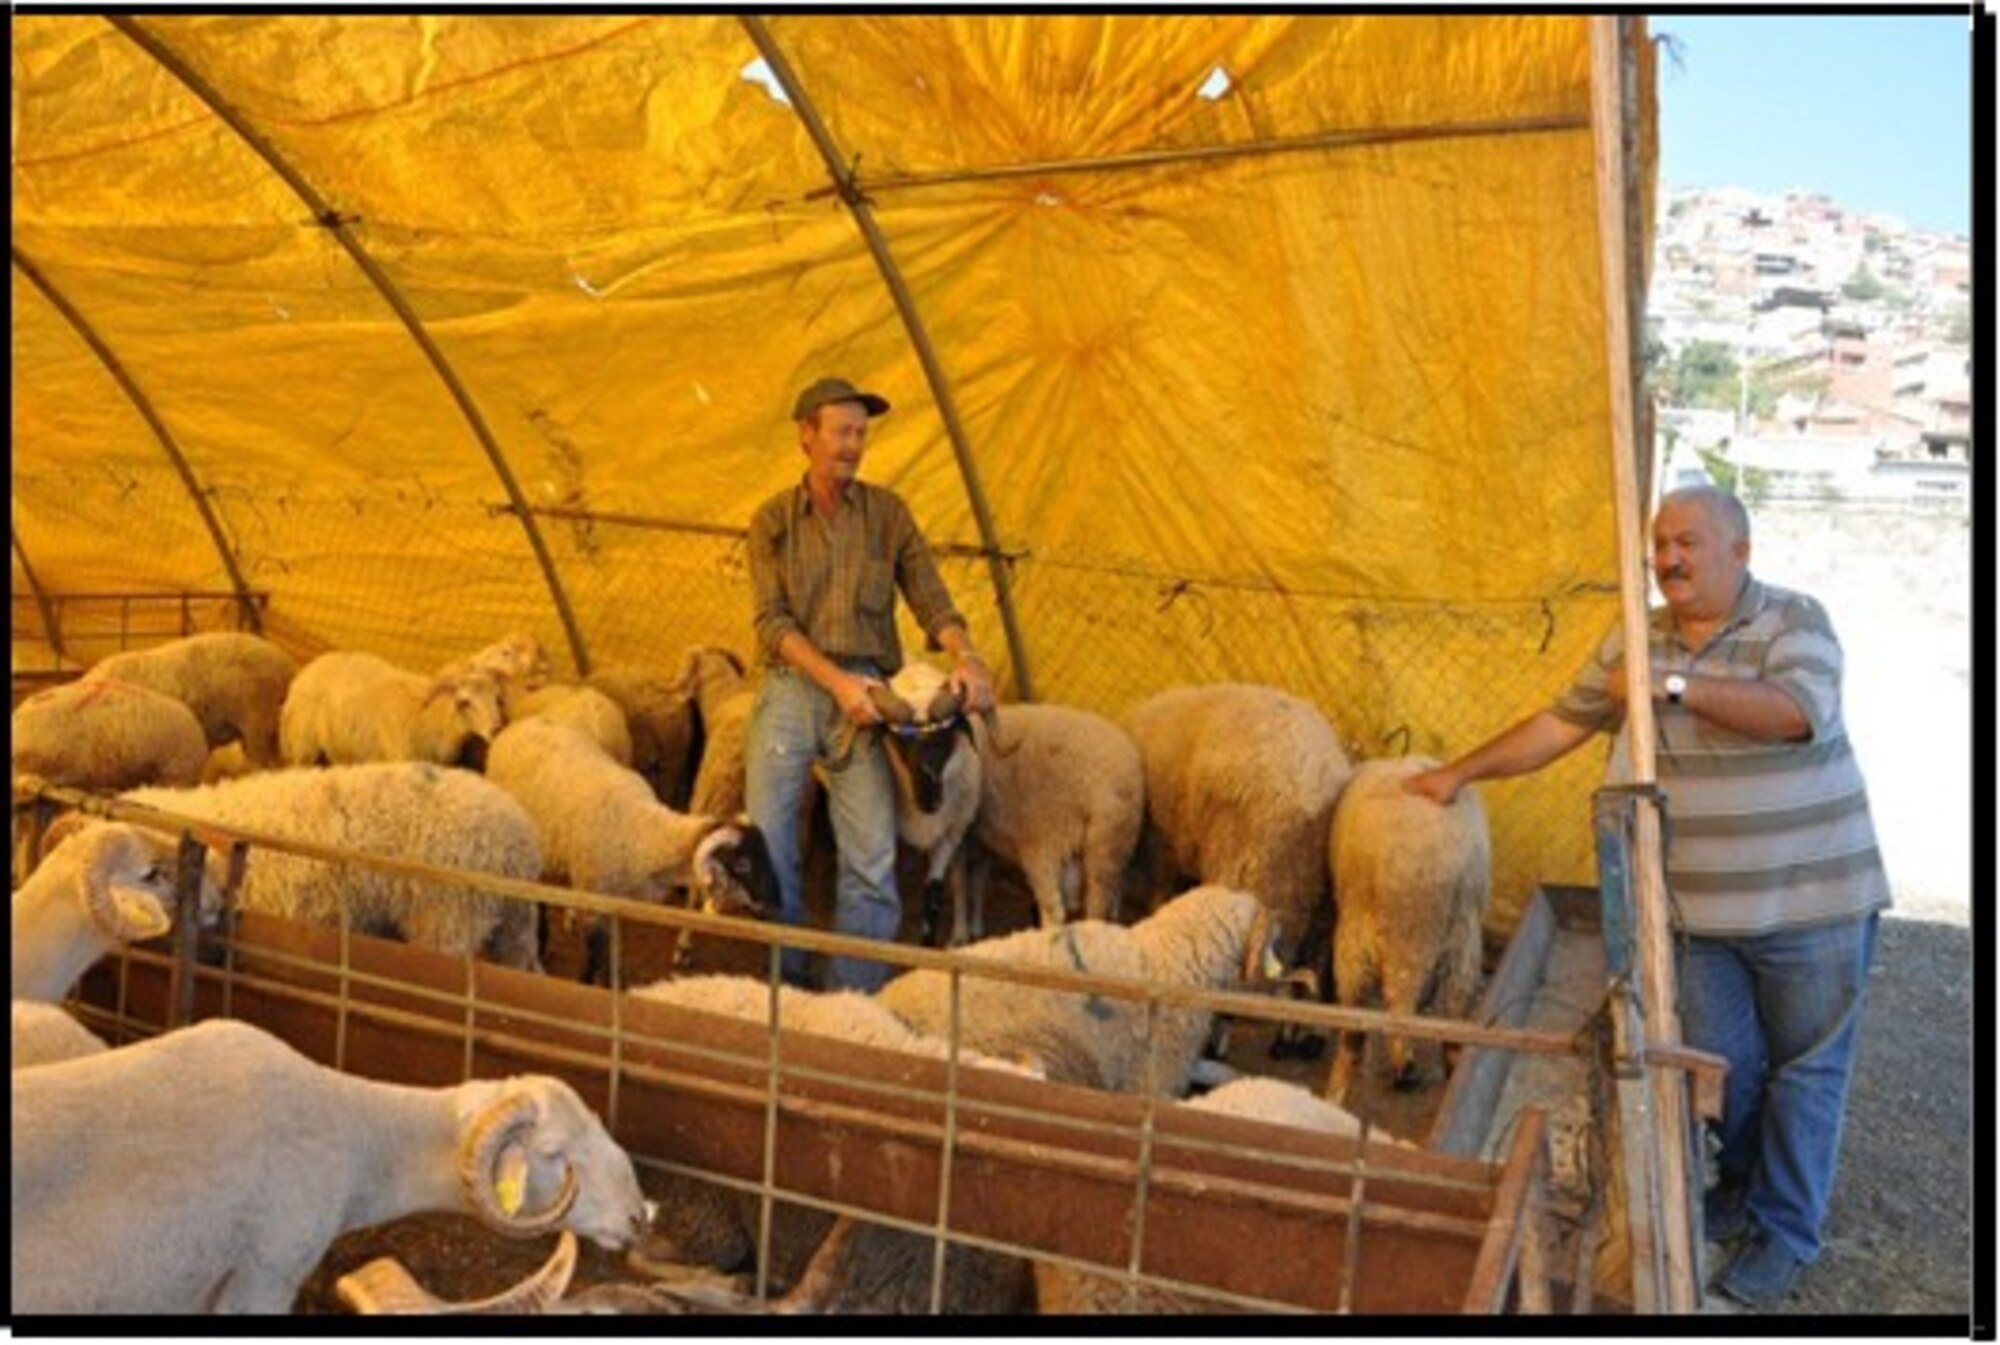 A local vendor shows sheep that are for the Sacrifice Holiday which is observed throughout the country from Aug. 11 through Aug. 14 this year.